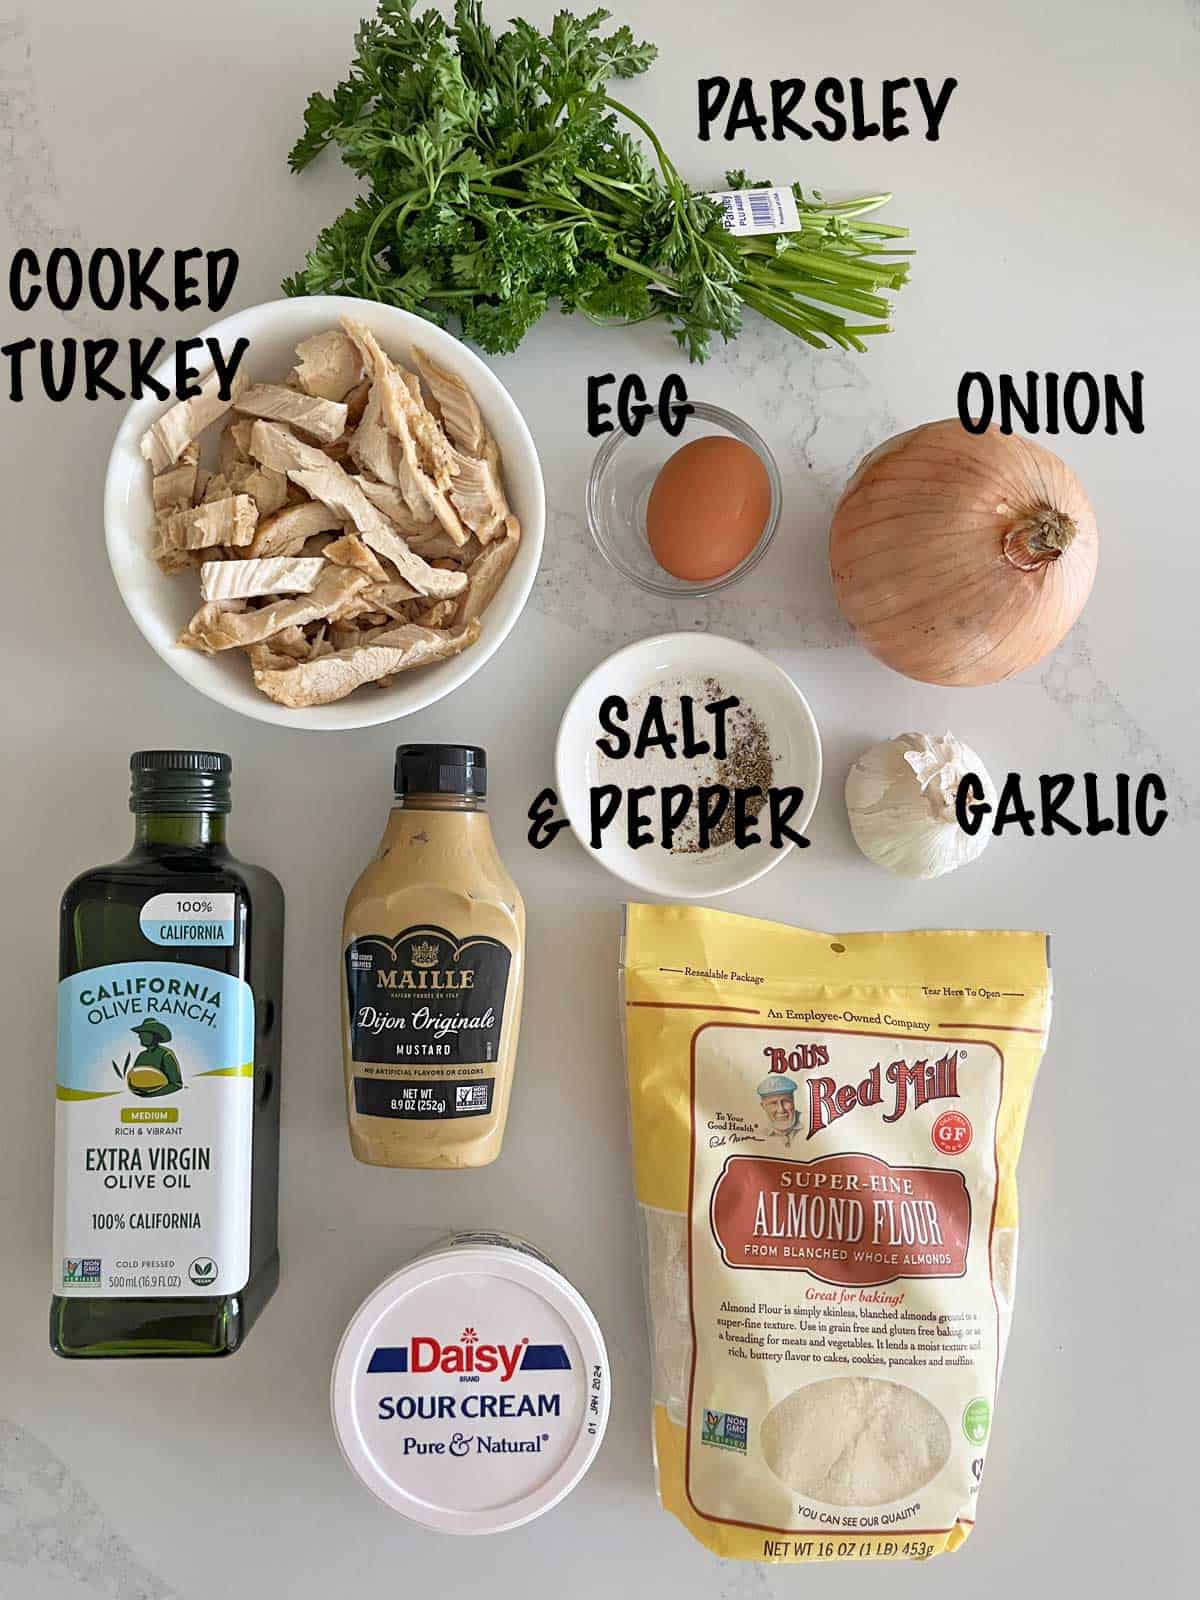 The ingredients needed to make leftover turkey patties.